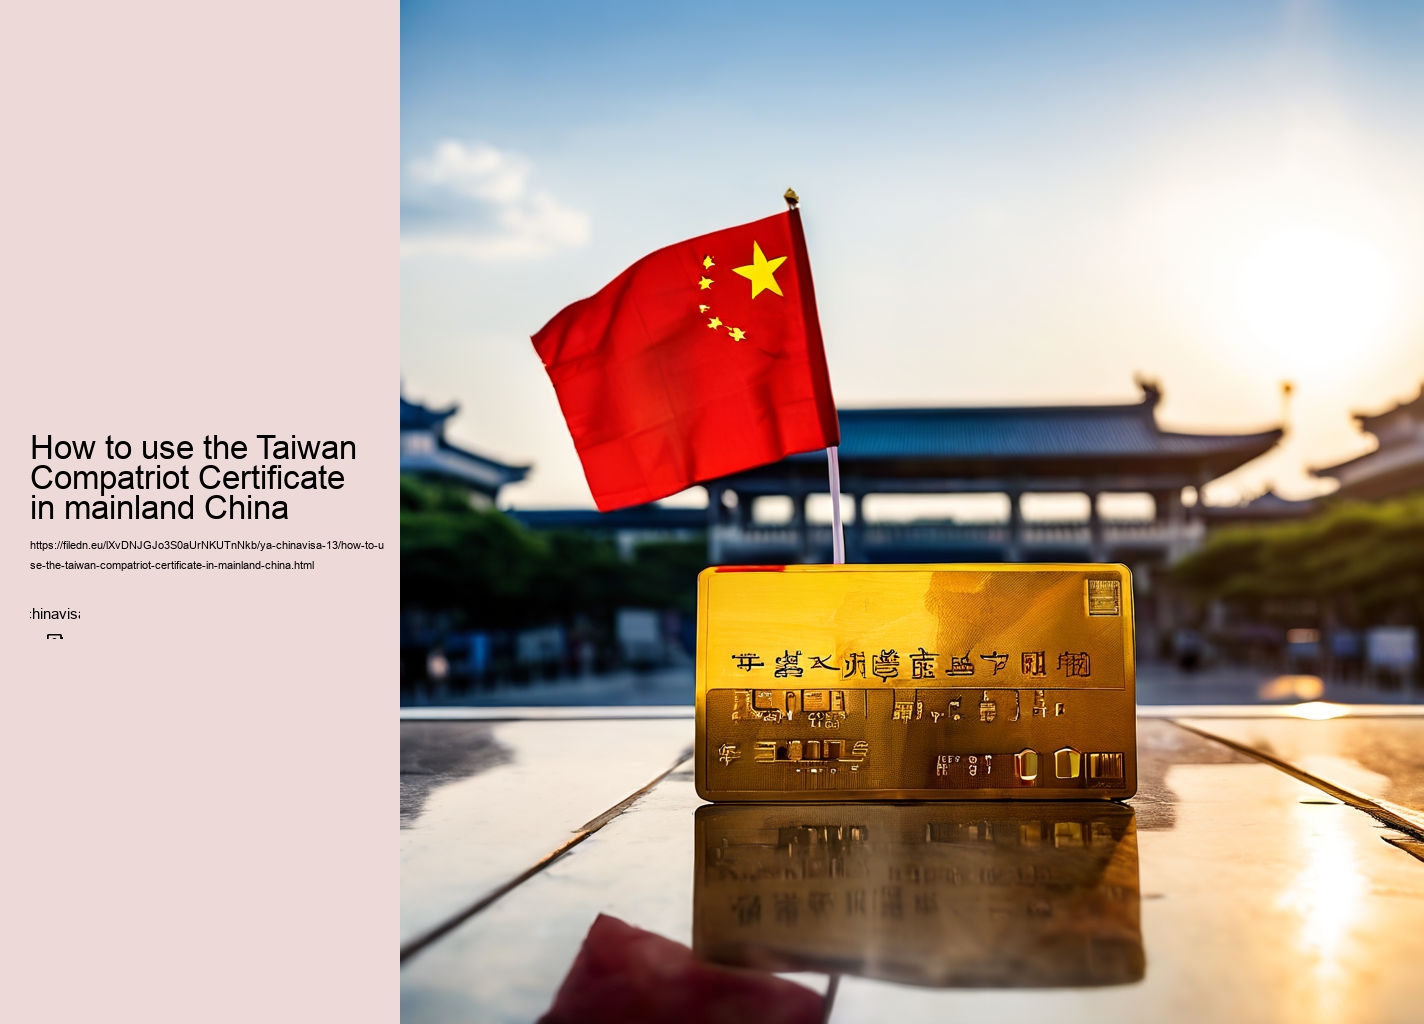 How to use the Taiwan Compatriot Certificate in mainland China